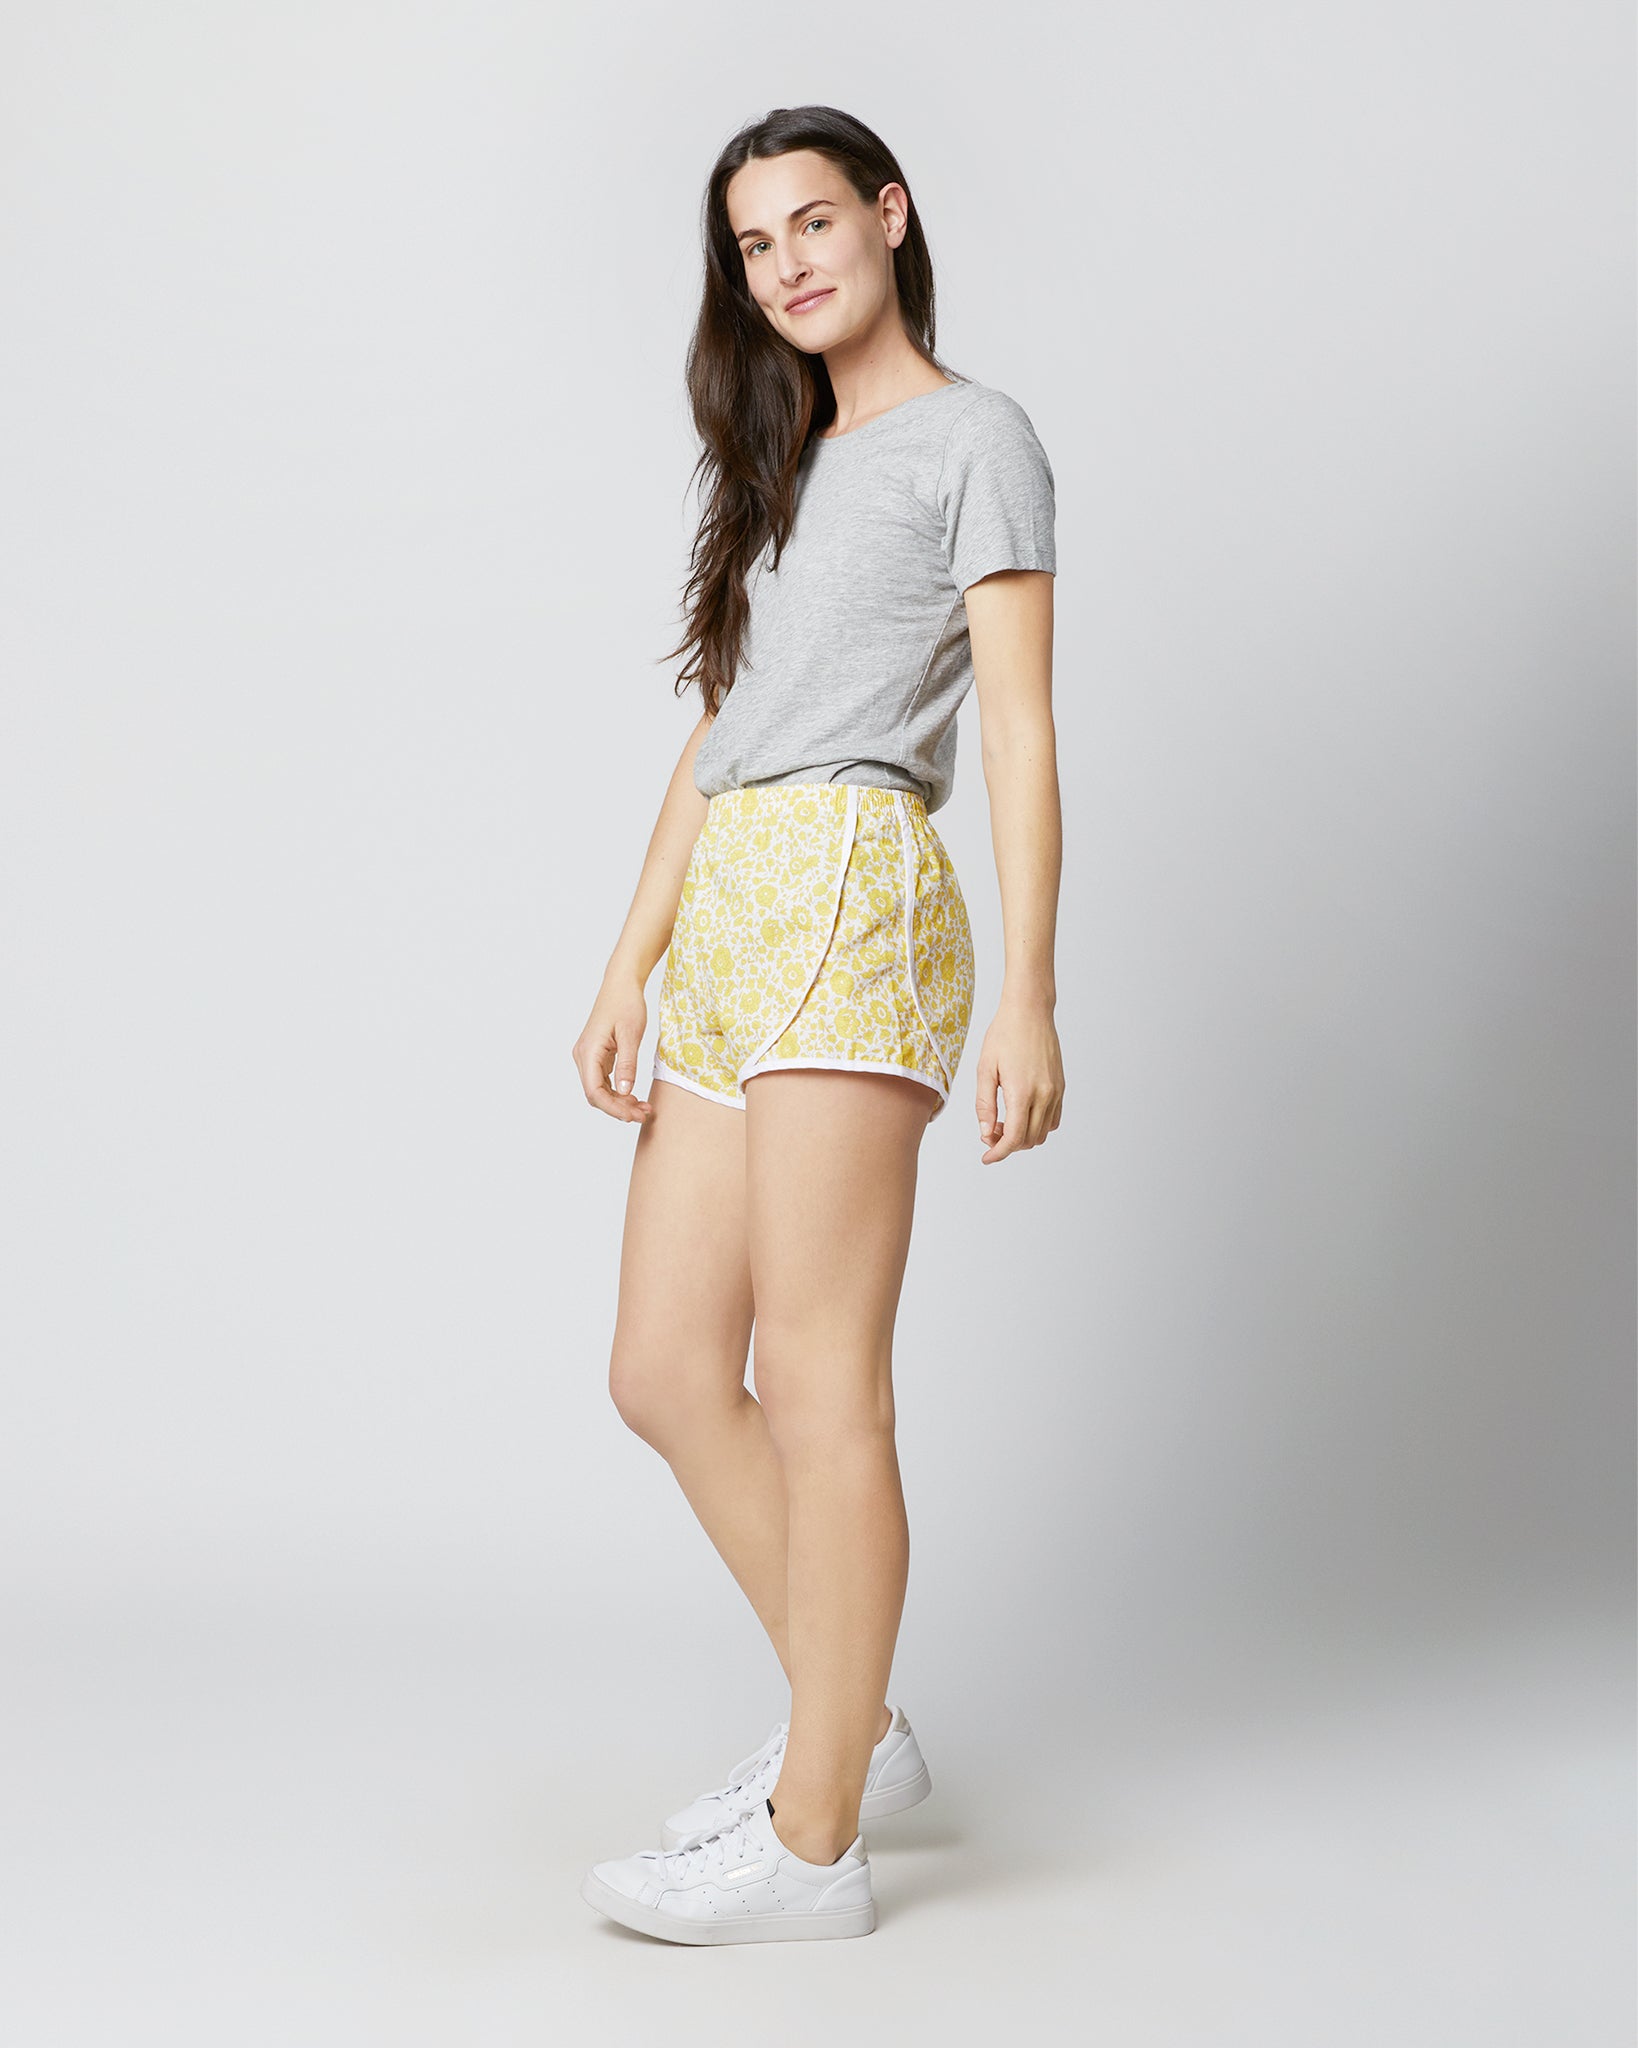 Track Short in Yellow D'Anjo Sky Liberty Fabric